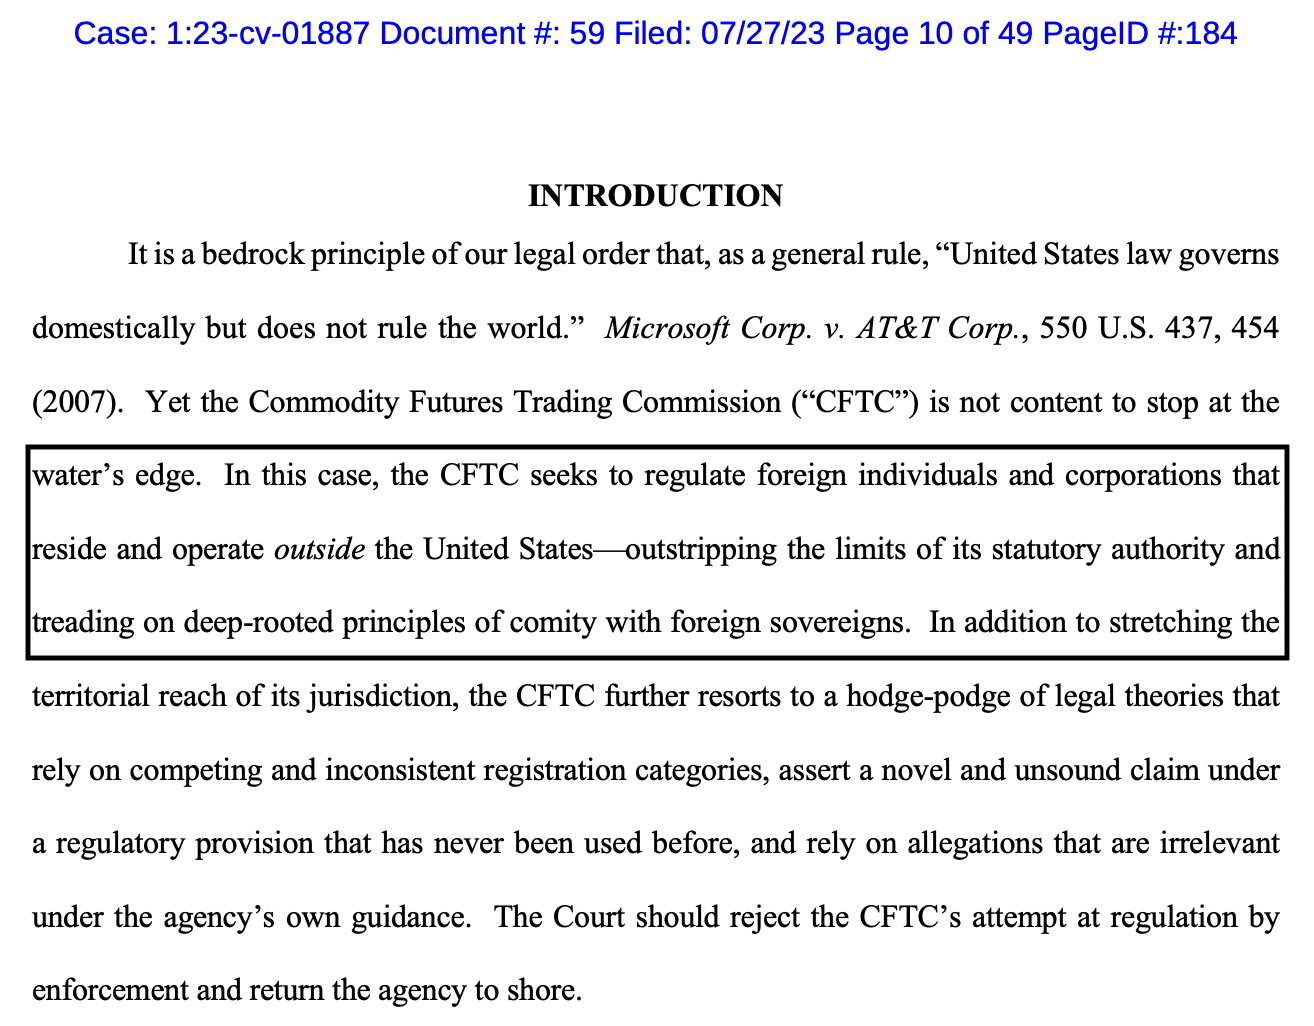 Binance's motion to dismiss the CFTC lawsuit